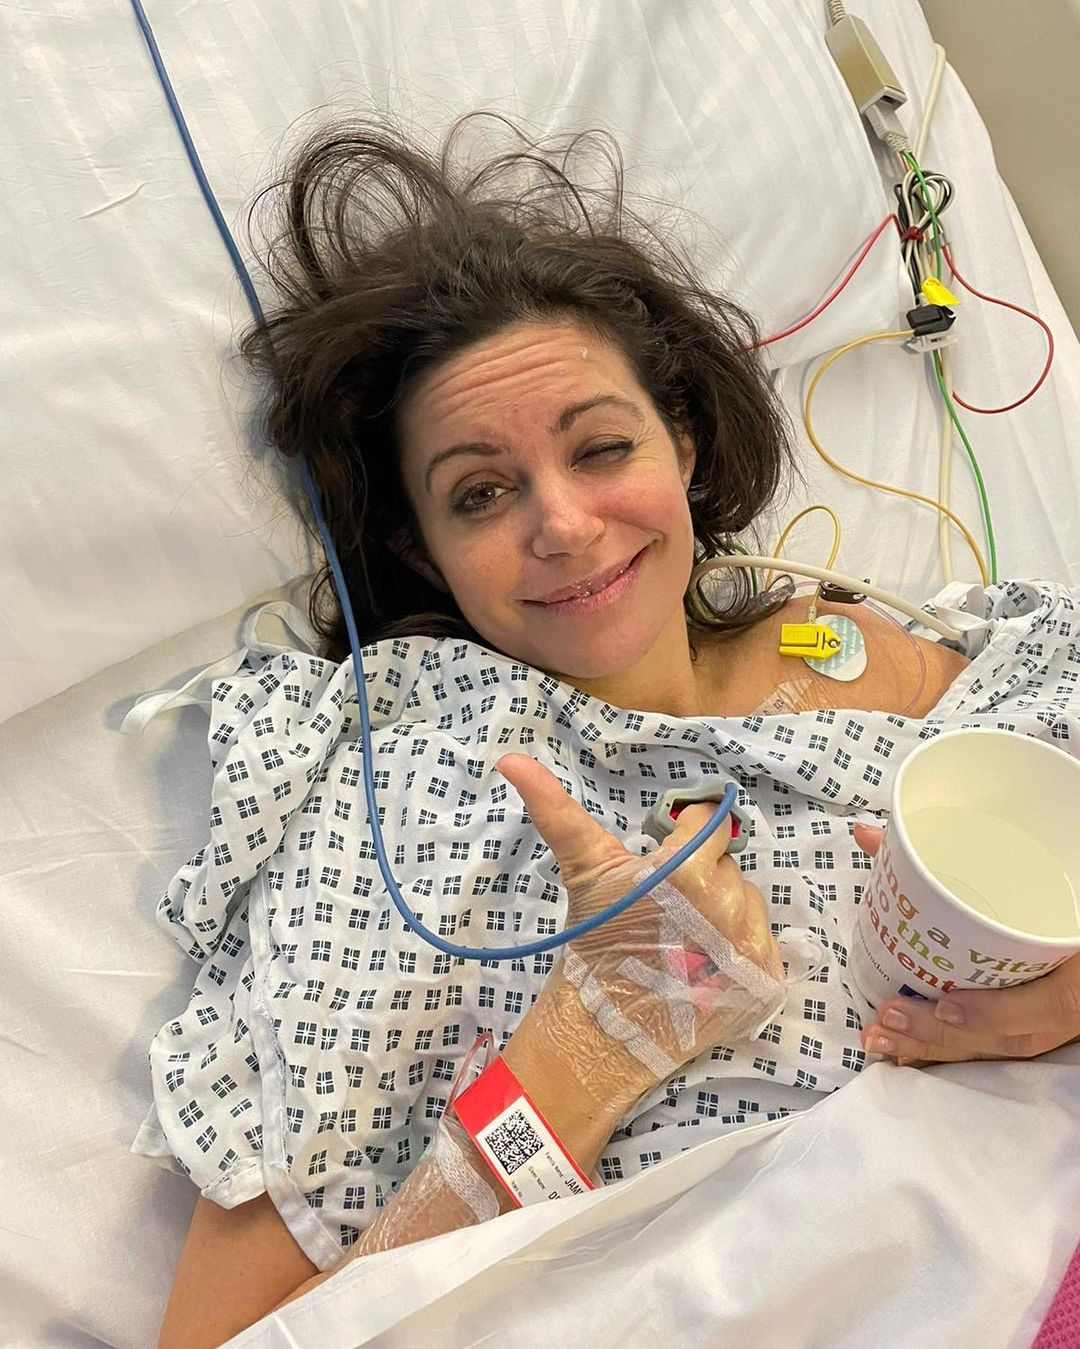 The Sun’s Deborah James shares brave pic recovering on hospital bed after nearly dying in ‘traumatic’ medical emergency